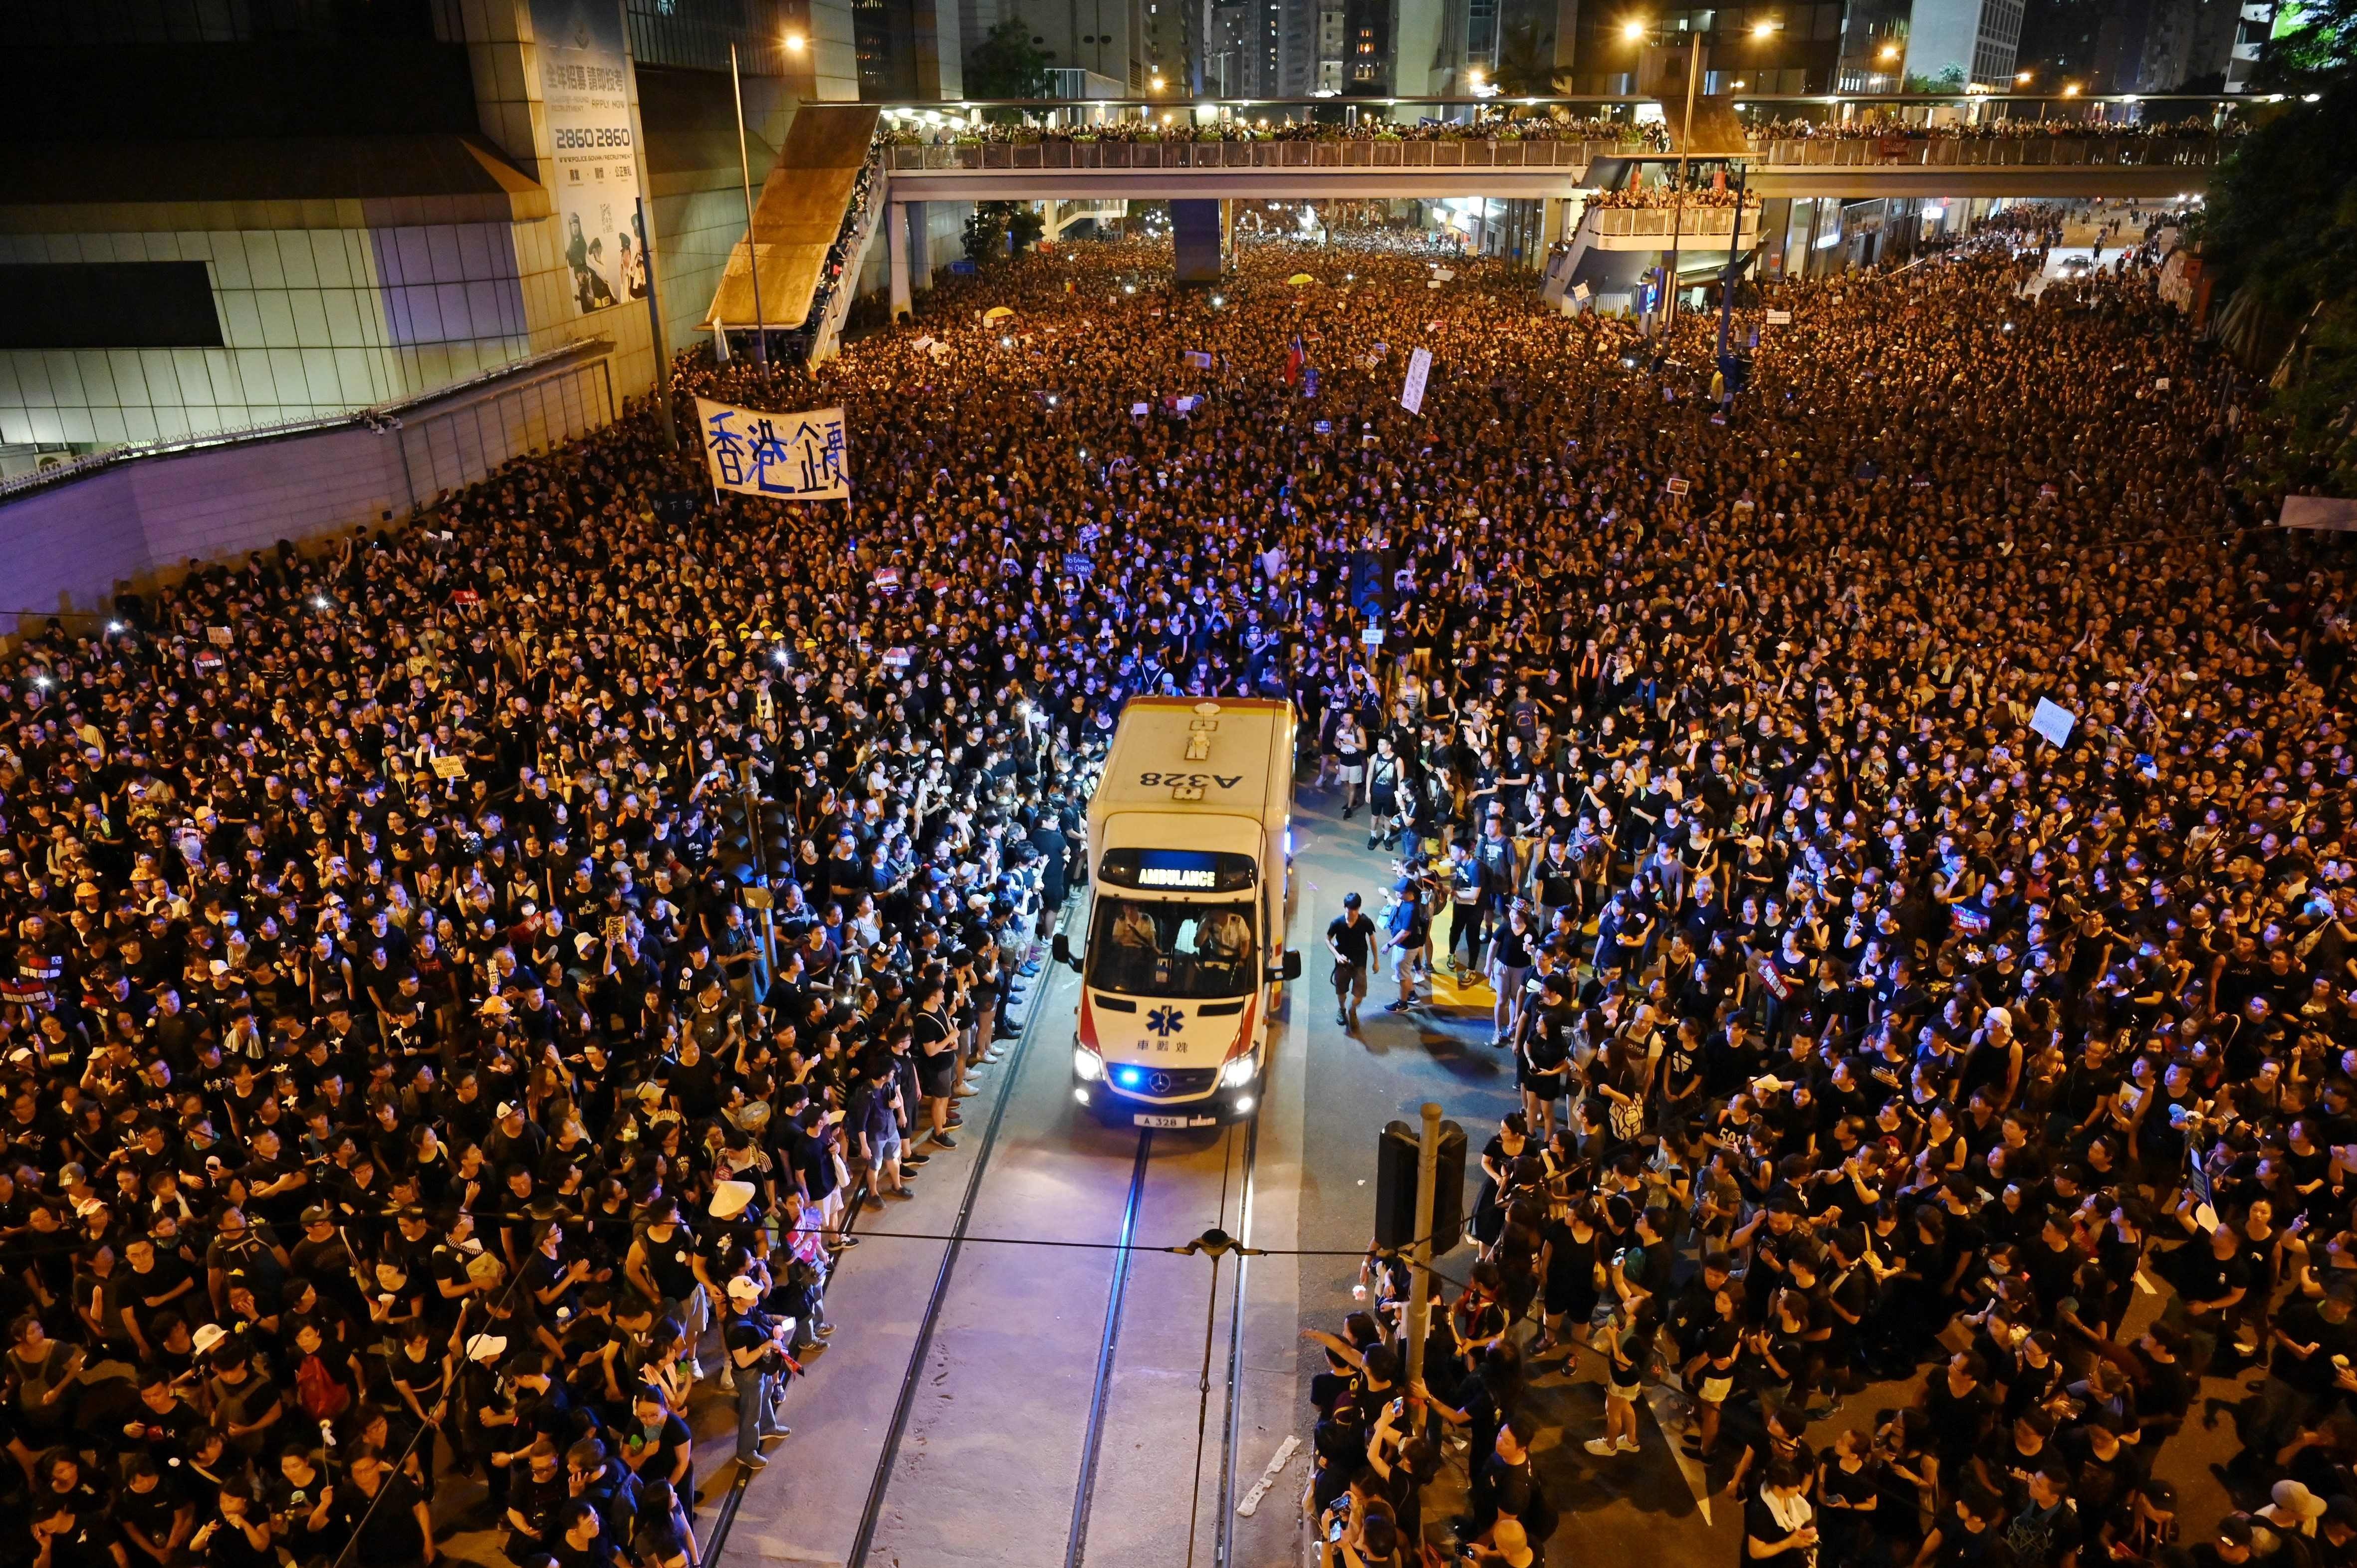 Crowds part to allow an ambulance through during a rally on June 16 against the Hong Kong government’s proposal to amend the city’s extradition laws that would allow the transfer of fugitives to mainland China. Photo: AFP